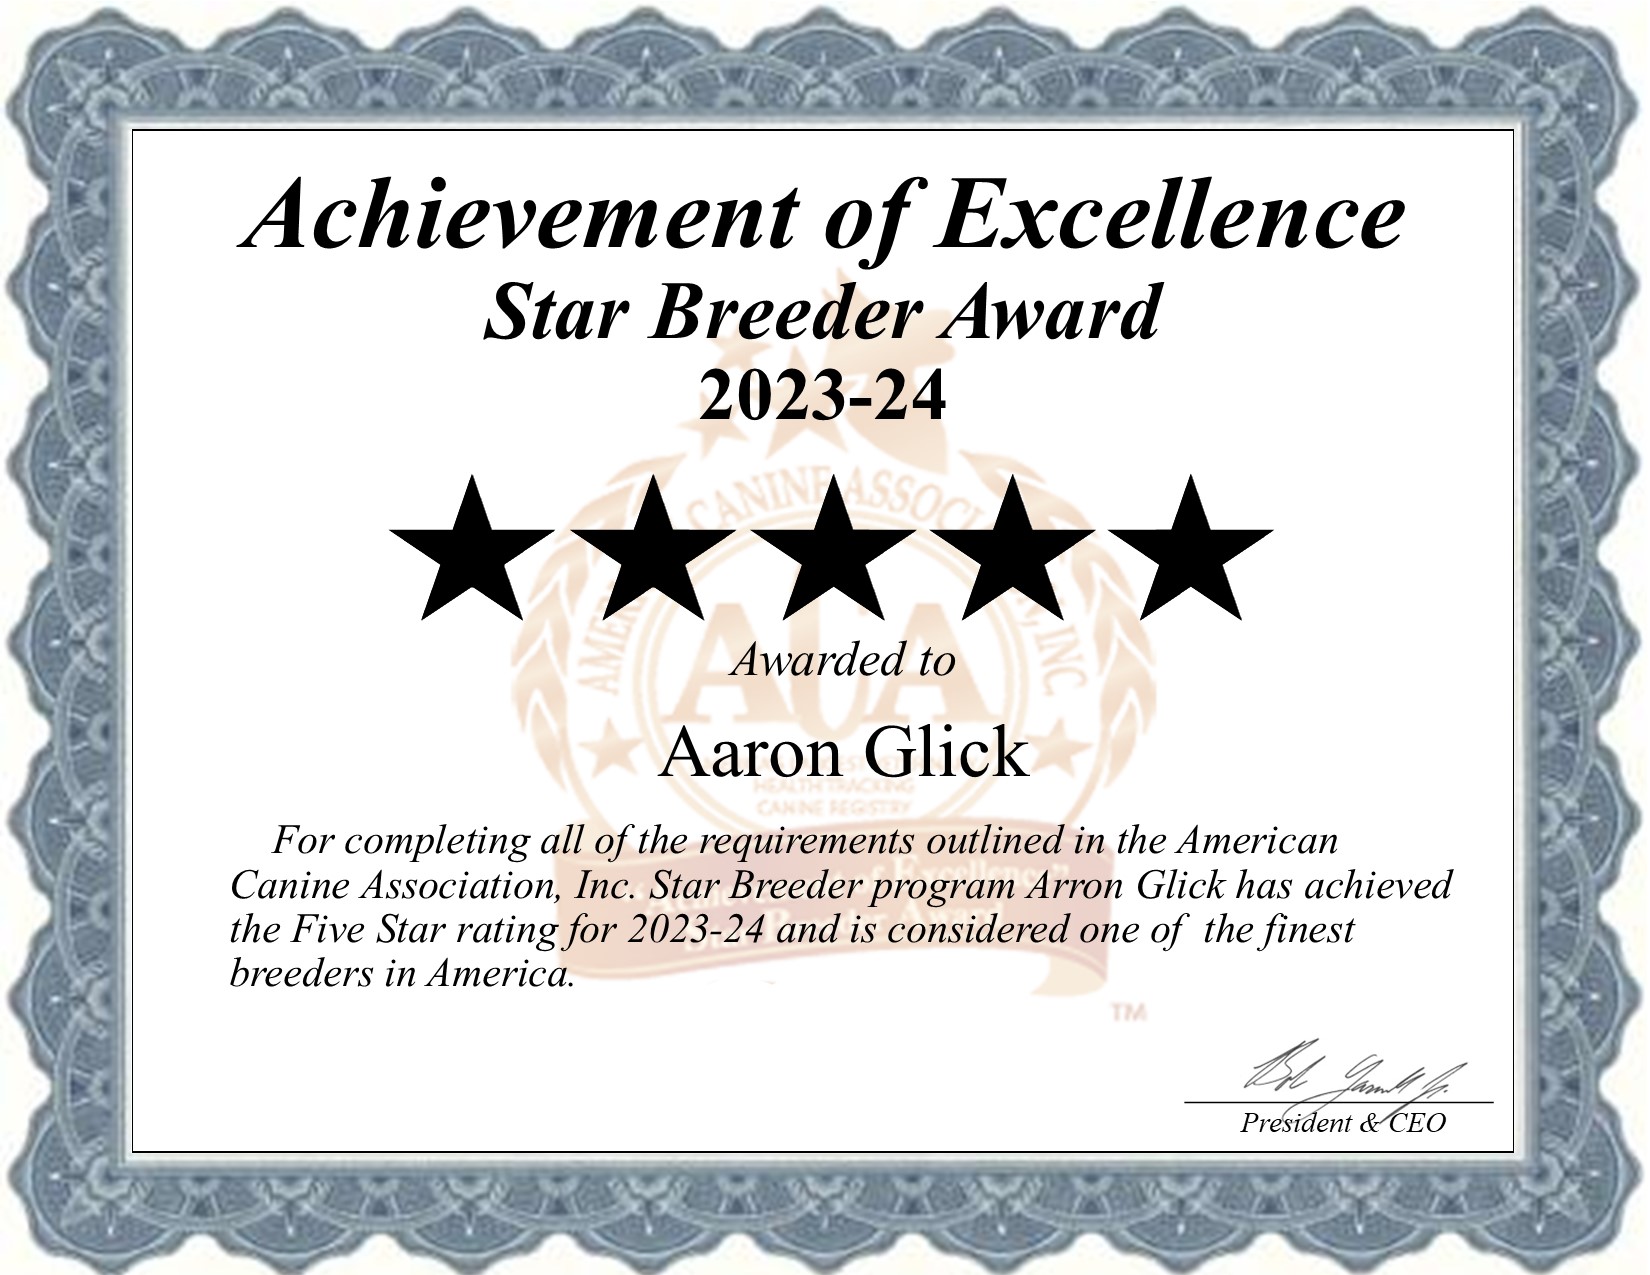 Aaron, Glick, dog, breeder, star, certificate, Aaron-Glick, Coatesville, PA, Pennsylvania, puppy, dog, kennels, mill, puppymill, usda, 5-star, aca, ica, registered, Doodle, none